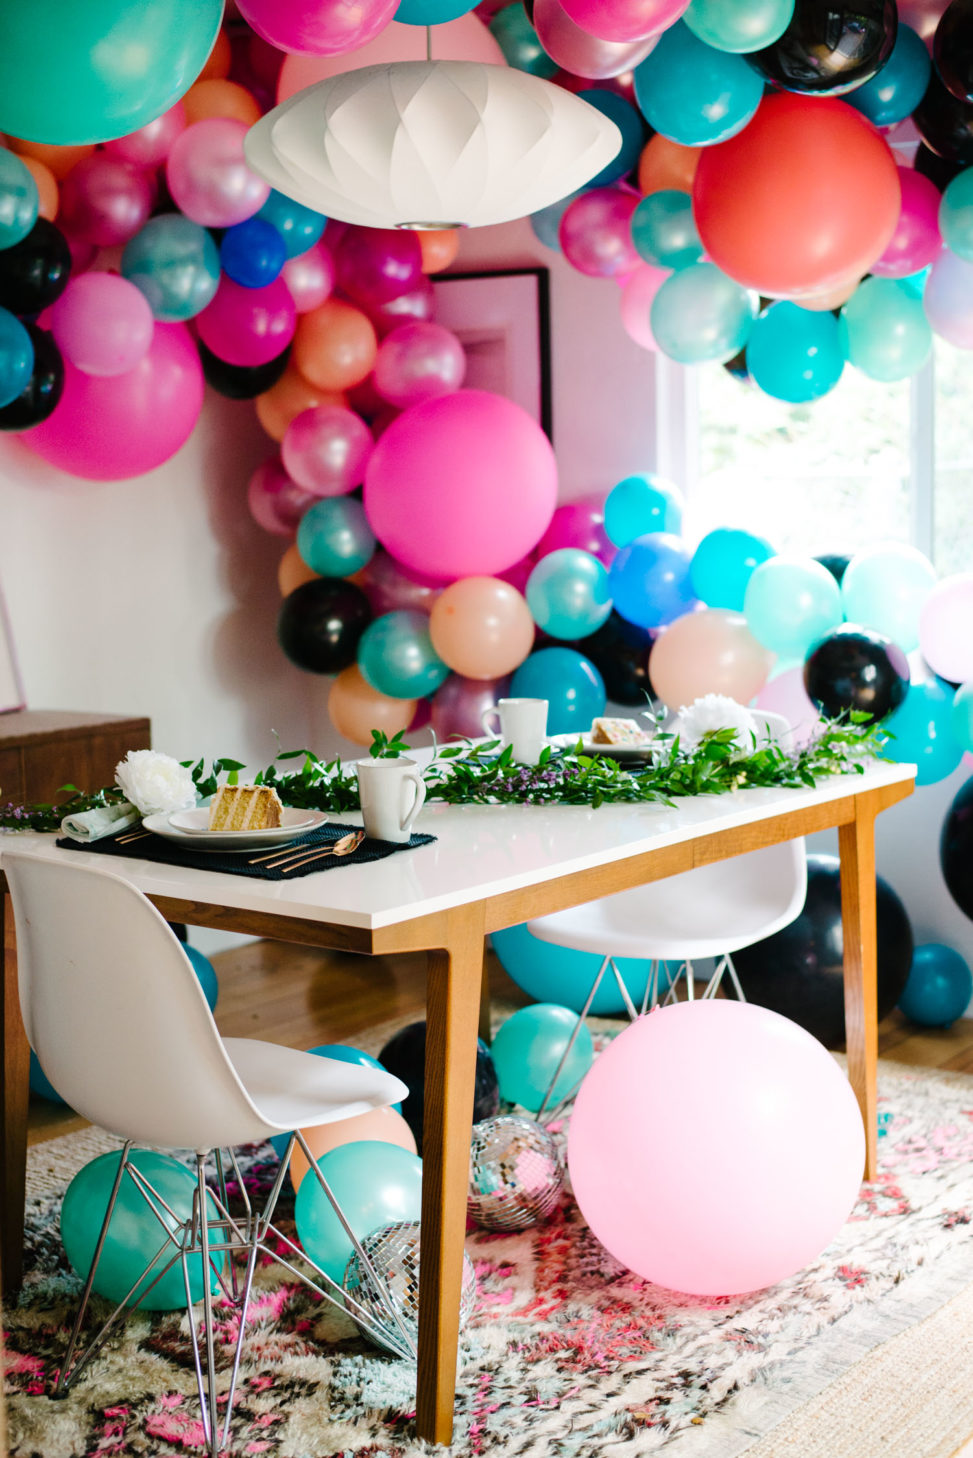 table set with wedding cake in a room filled with a balloon installation